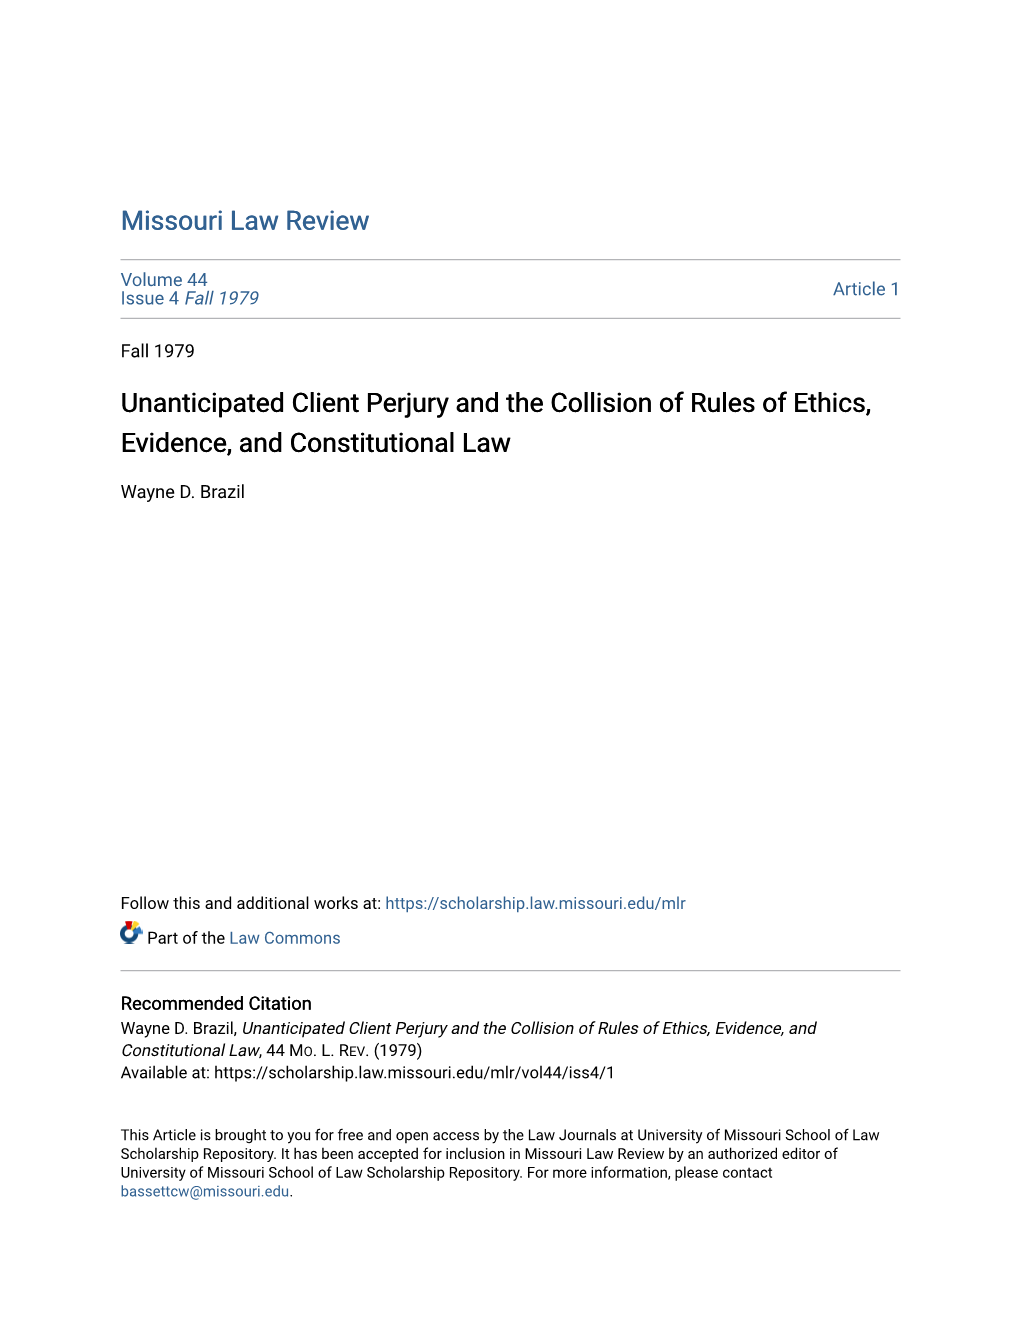 Unanticipated Client Perjury and the Collision of Rules of Ethics, Evidence, and Constitutional Law